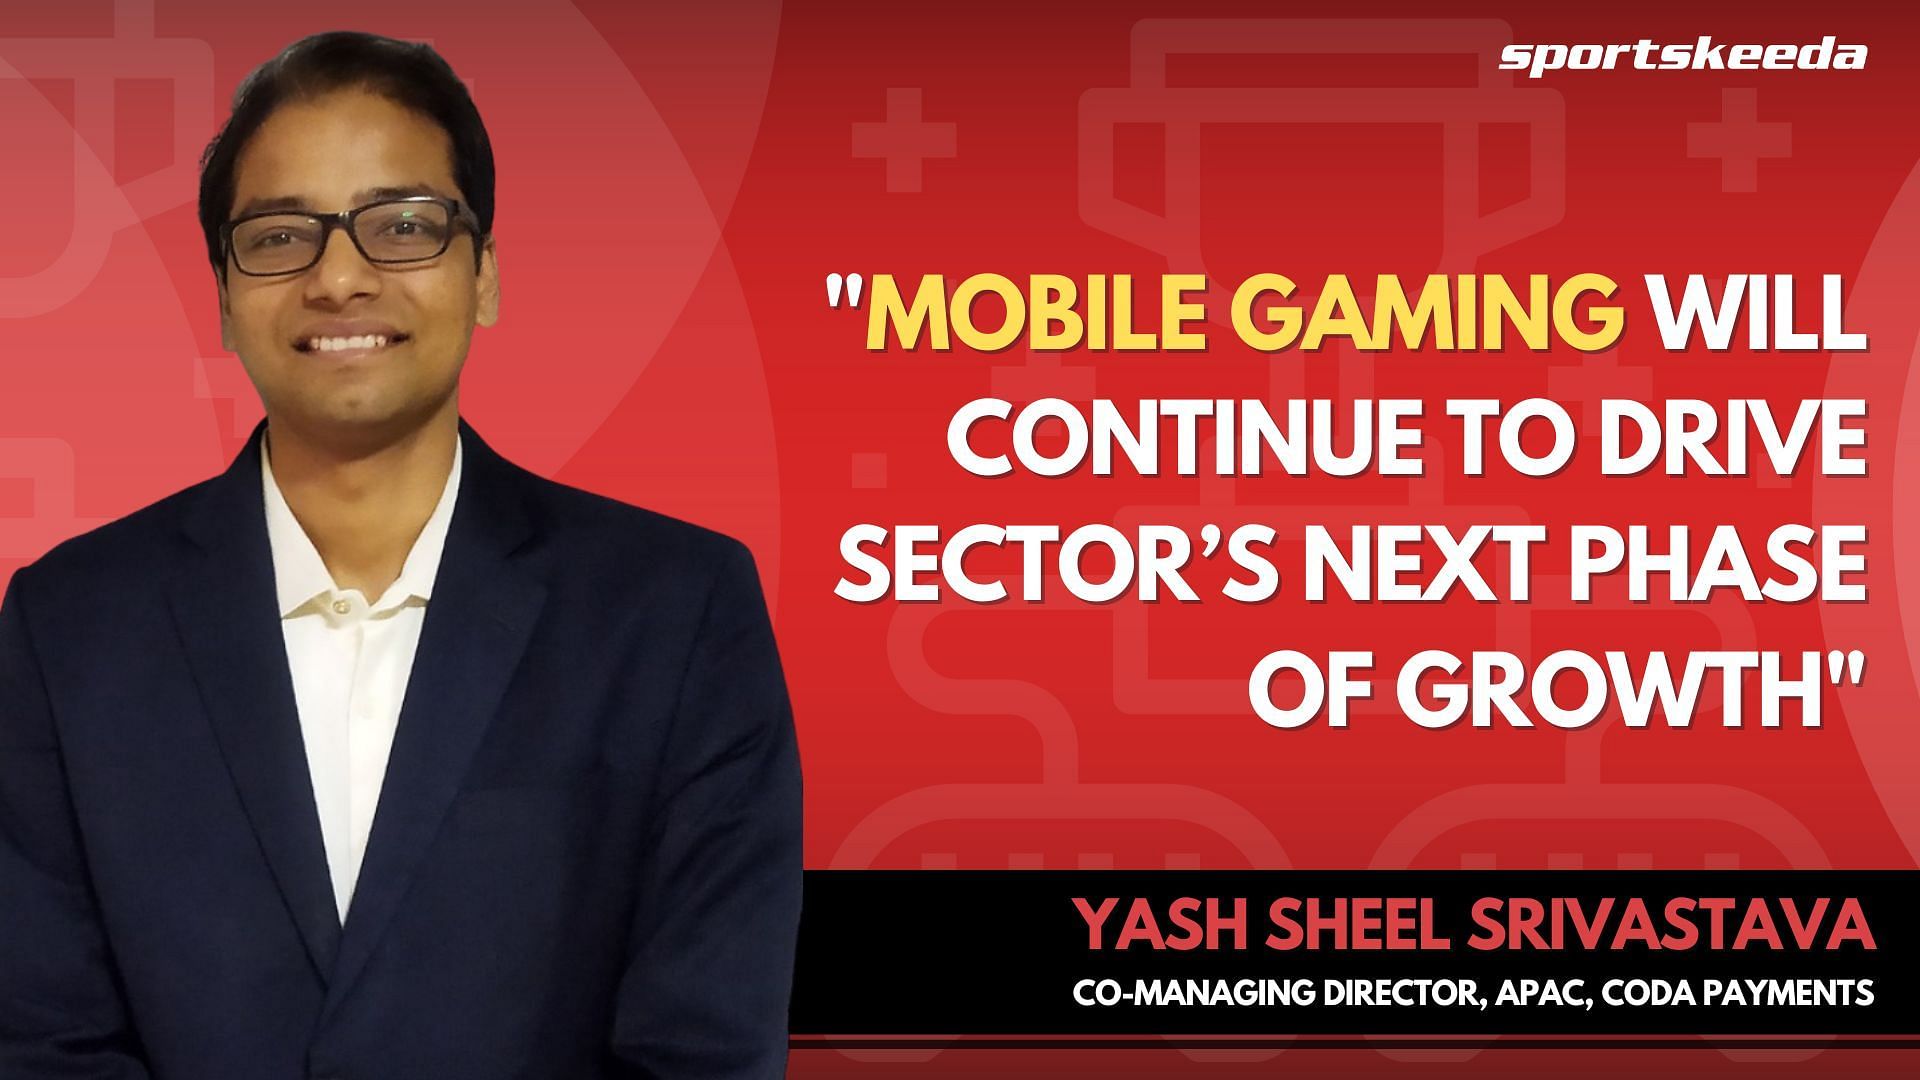 Mobile gaming will continue to drive sector&rsquo;s next phase of growth, says Coda Payments APAC MD Yash Sheel Srivastava